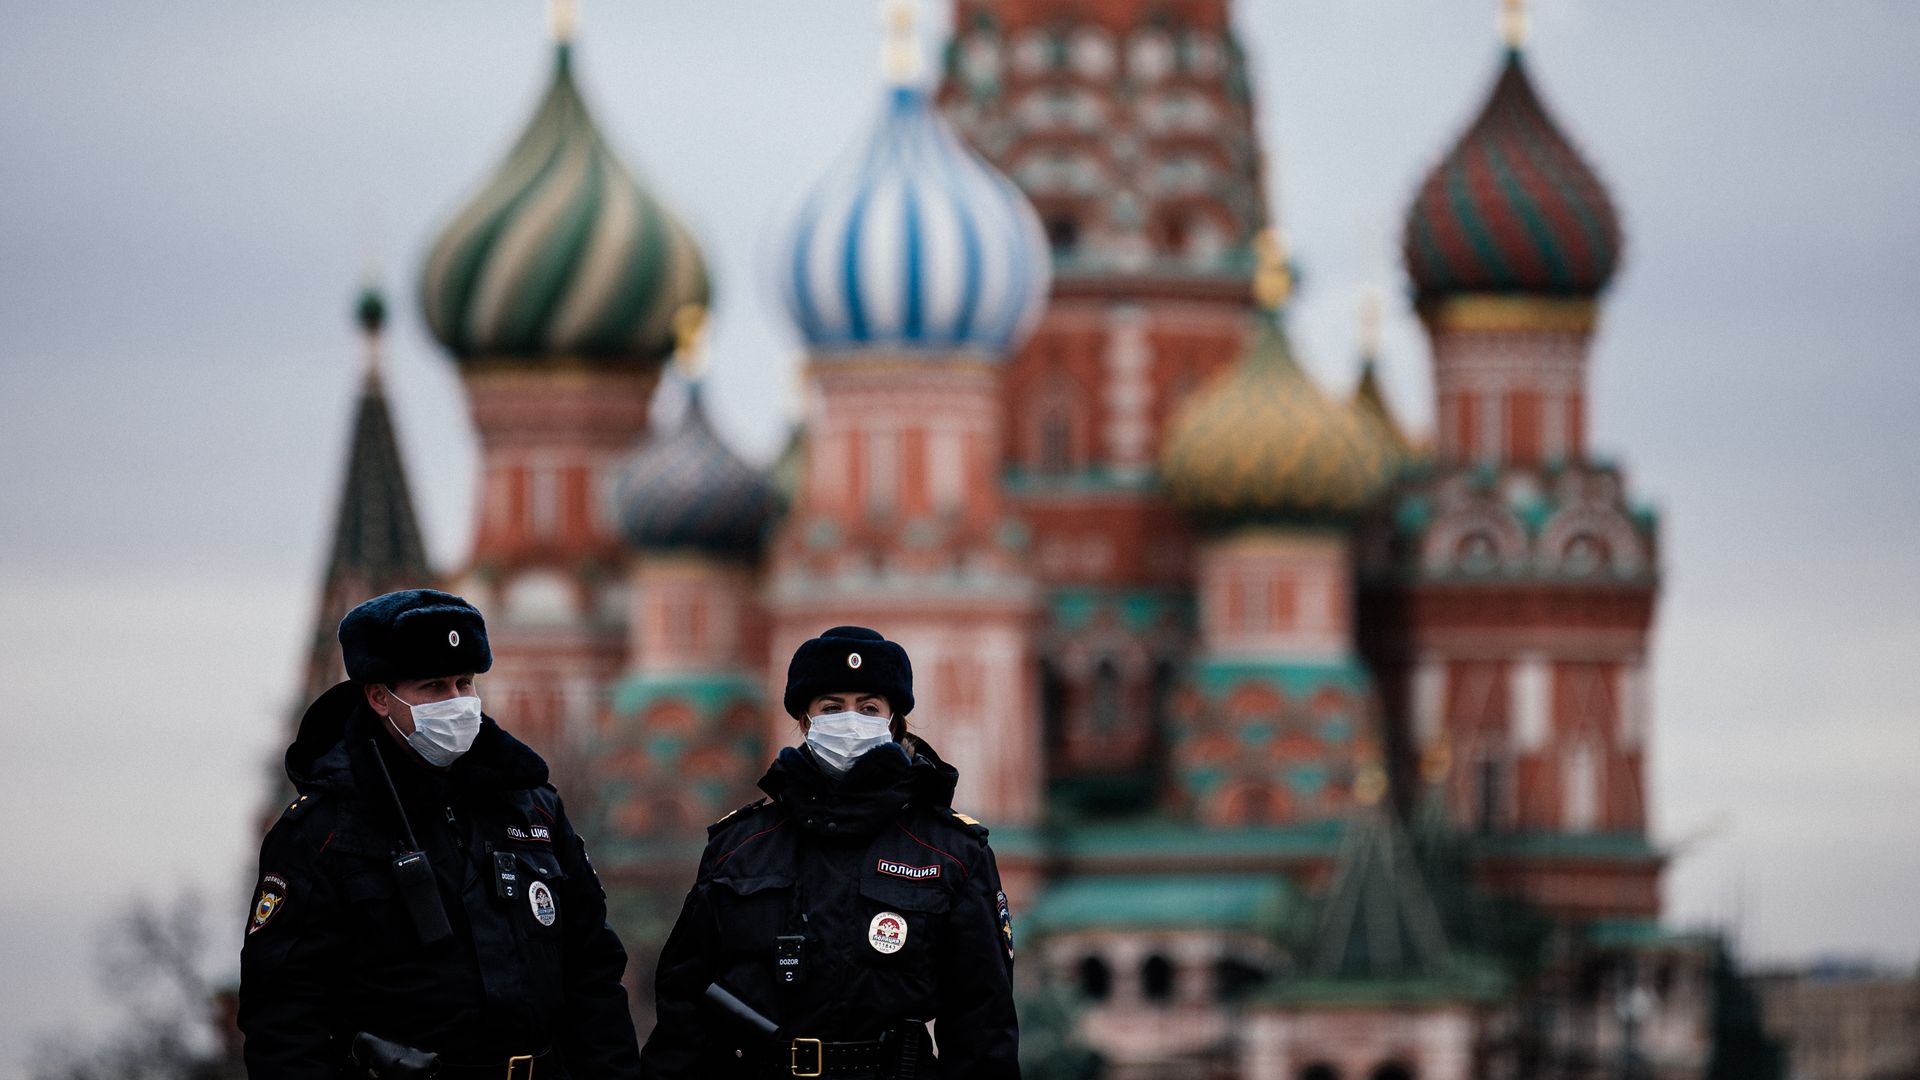 Russian police officers in front of Saint Basil's Cathedral in Moscow in March 2020.